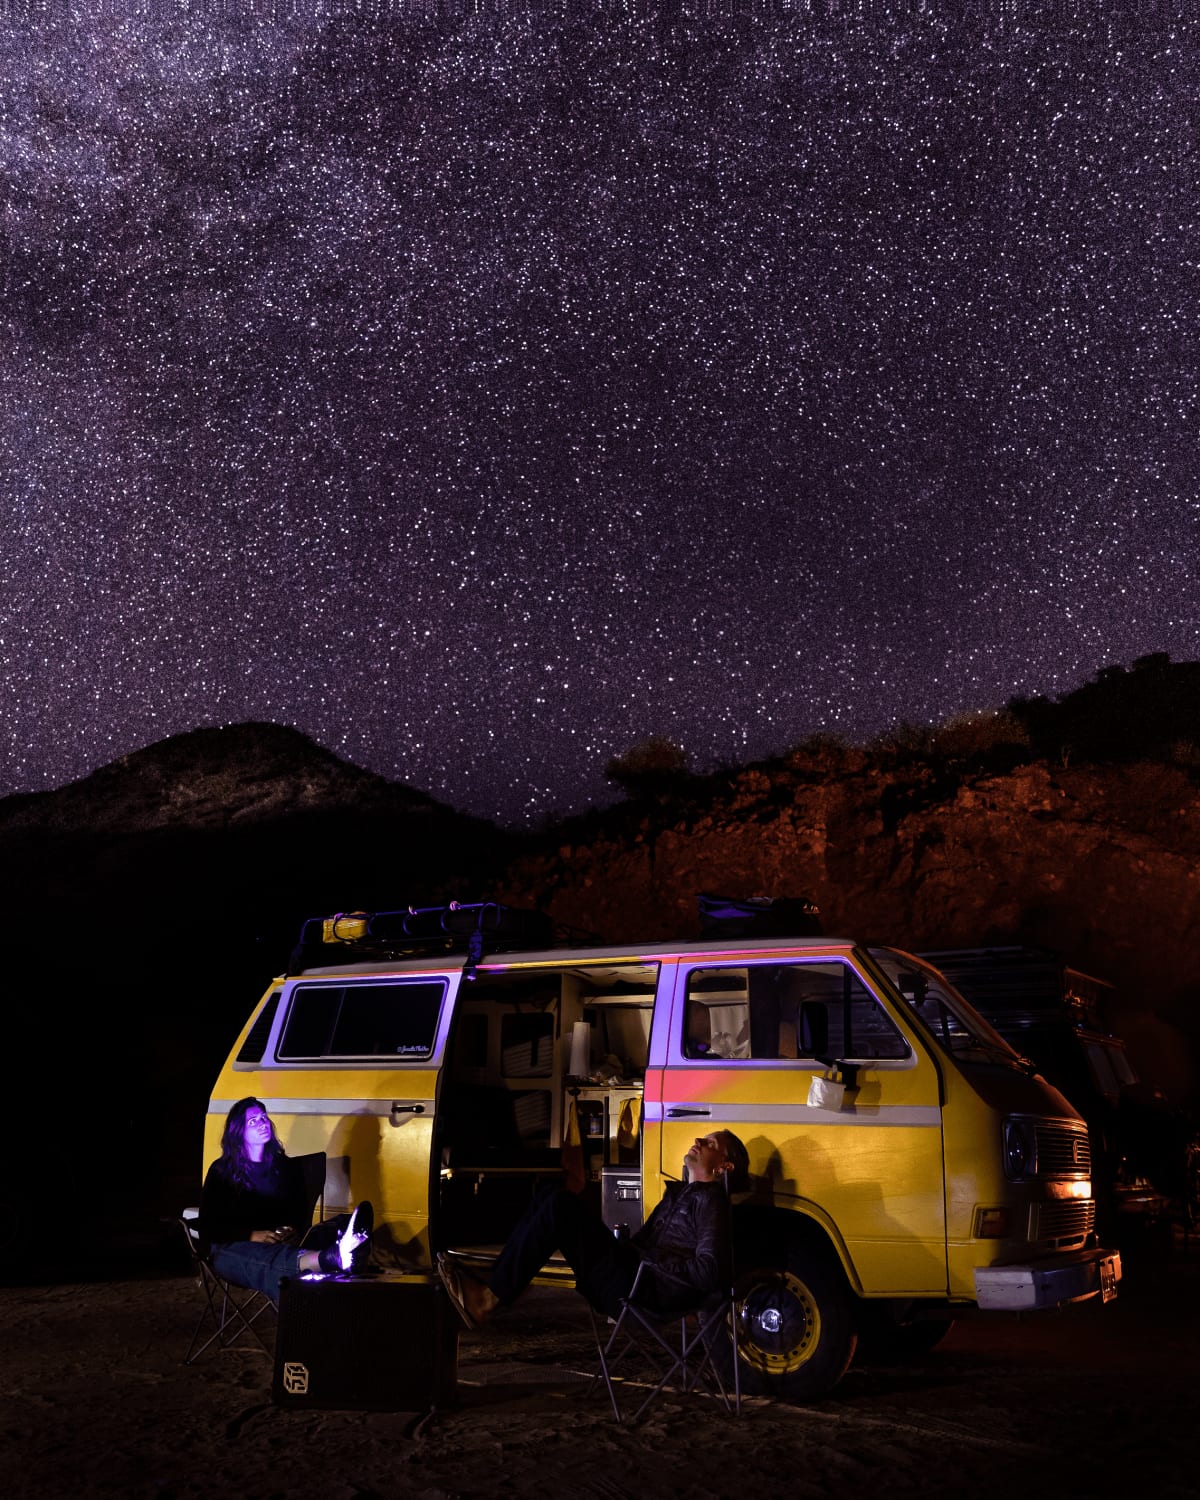 The galaxy and our campsite at Baja midnight (i.e. 9pm)